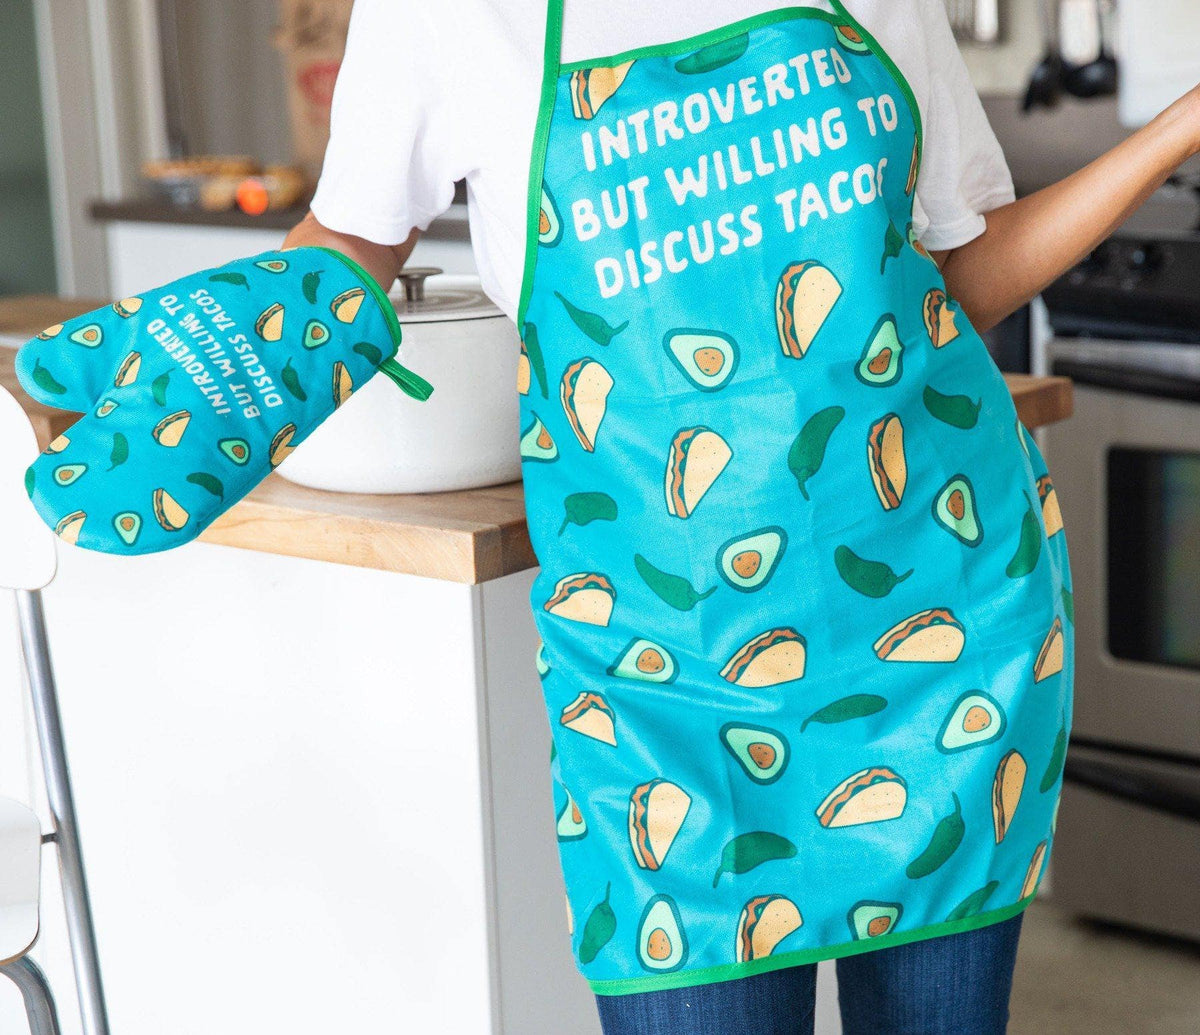 Introverted But Willing To Discuss Tacos Oven Mitt + Apron - Crazy Dog T-Shirts